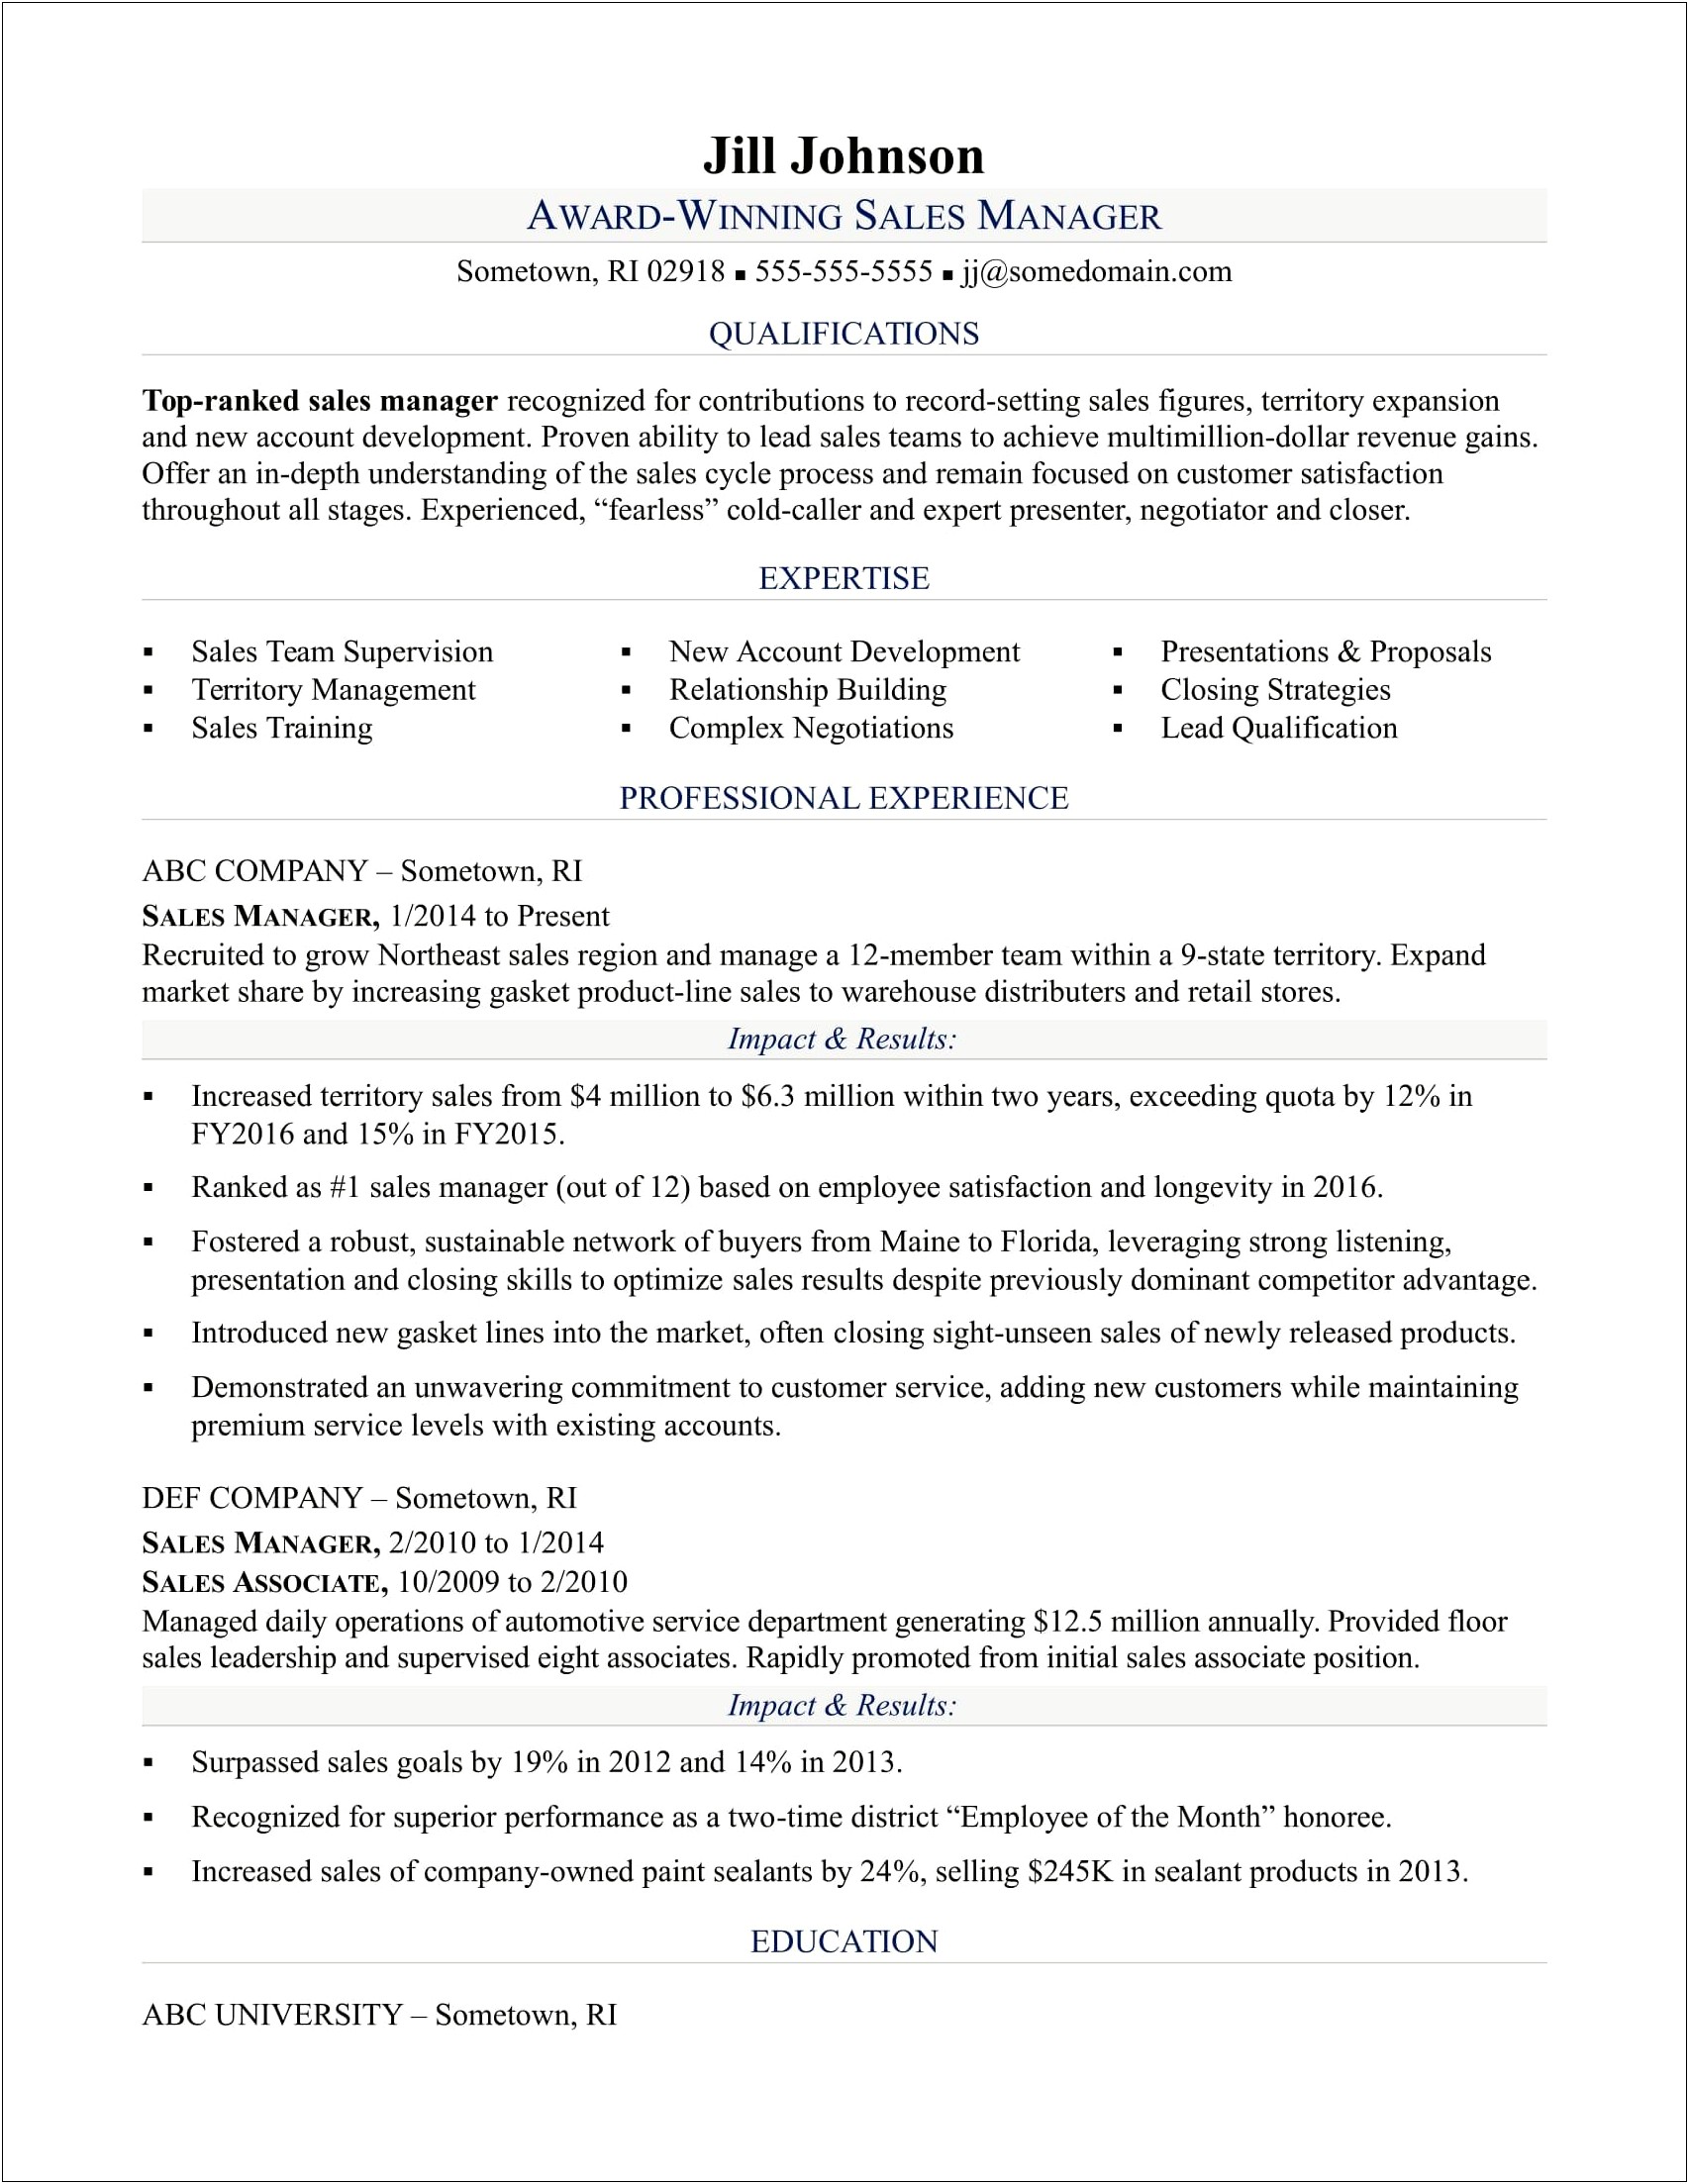 Resume Objective For Business Sales Position